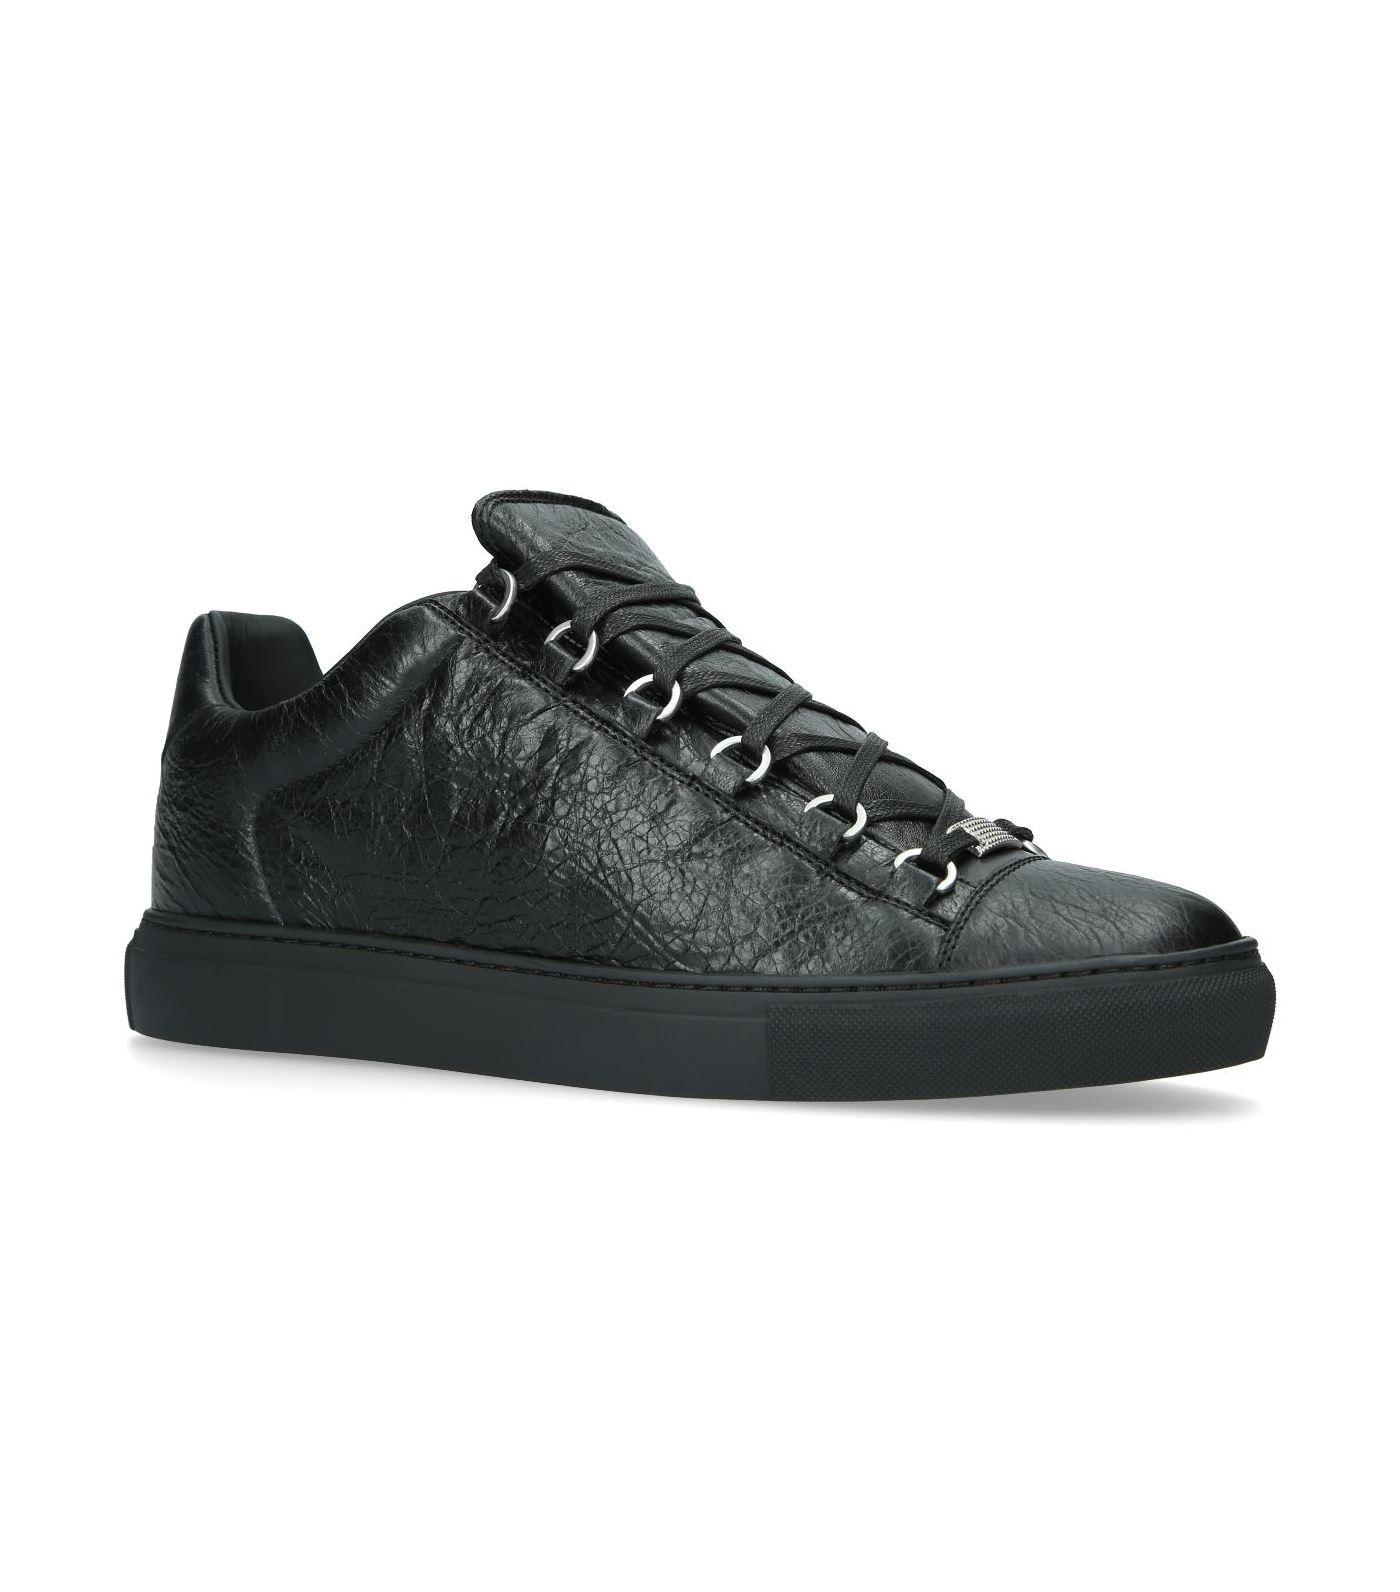 Balenciaga Leather Arena Low-top Sneakers in Black for Men - Lyst